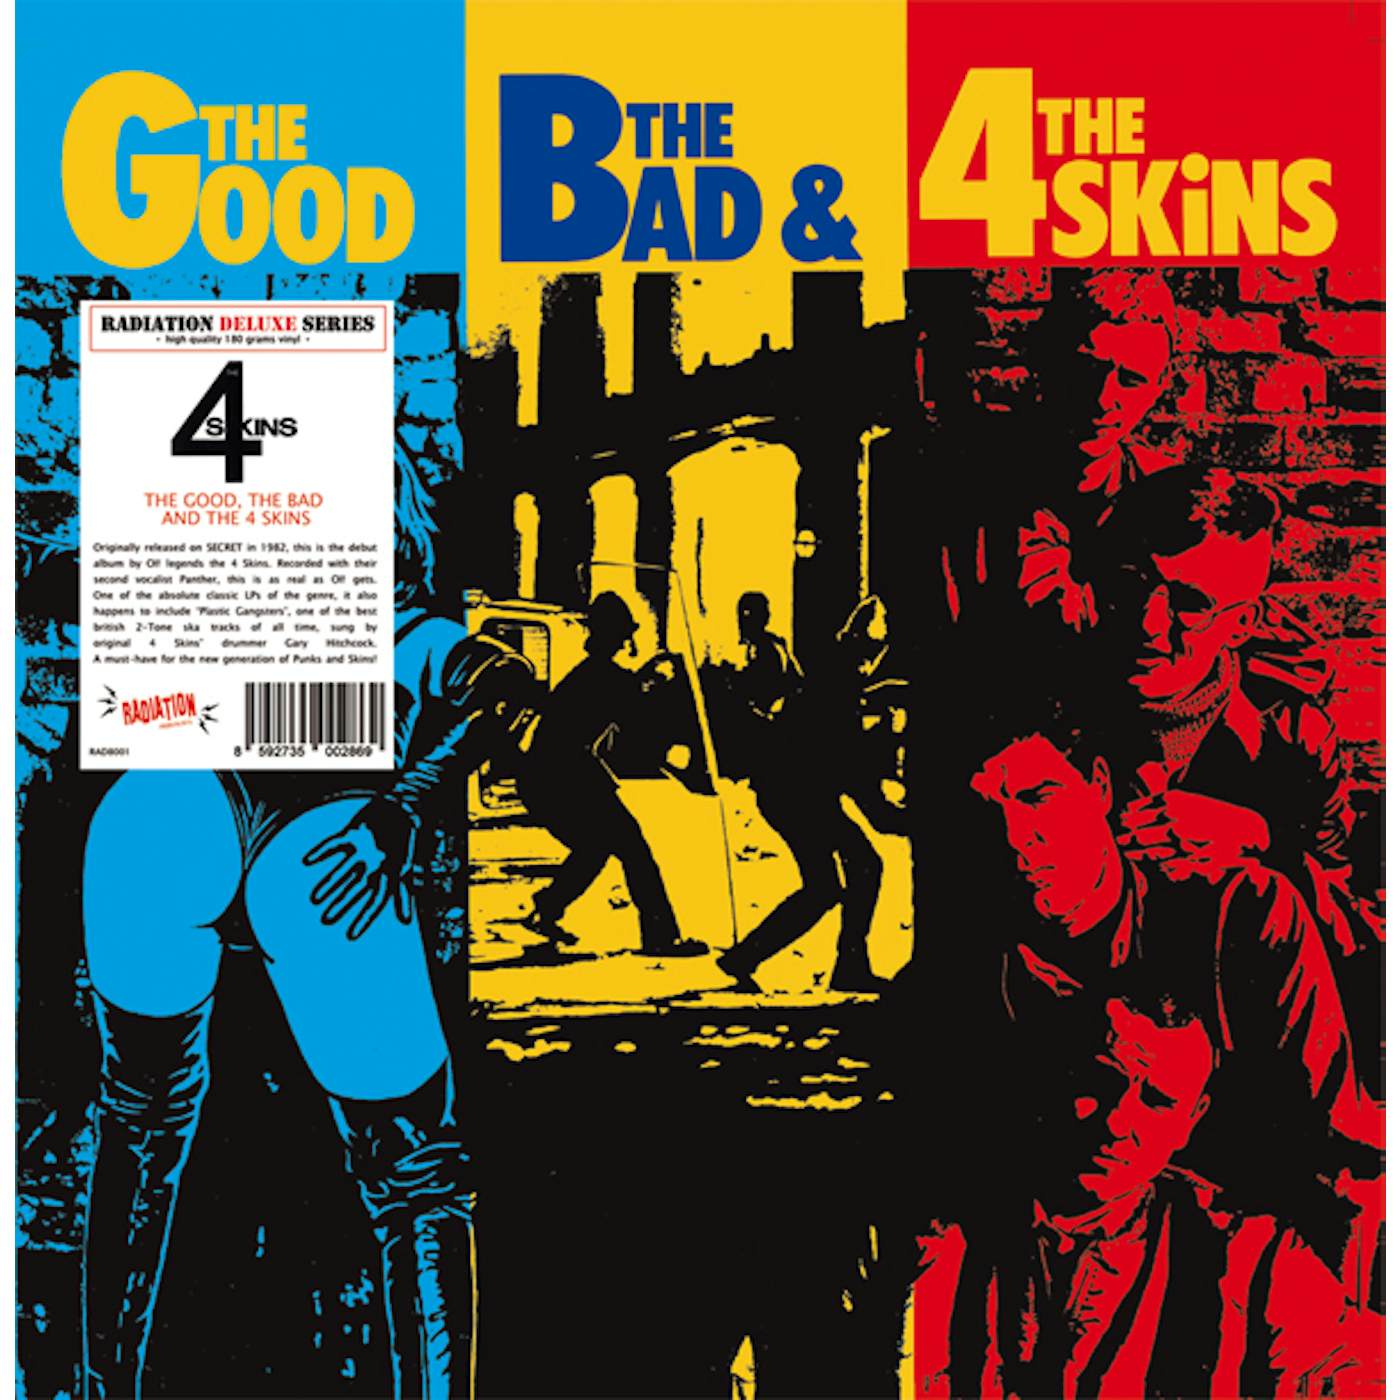 GOOD THE BAD & THE 4 SKINS Vinyl Record - Italy Release